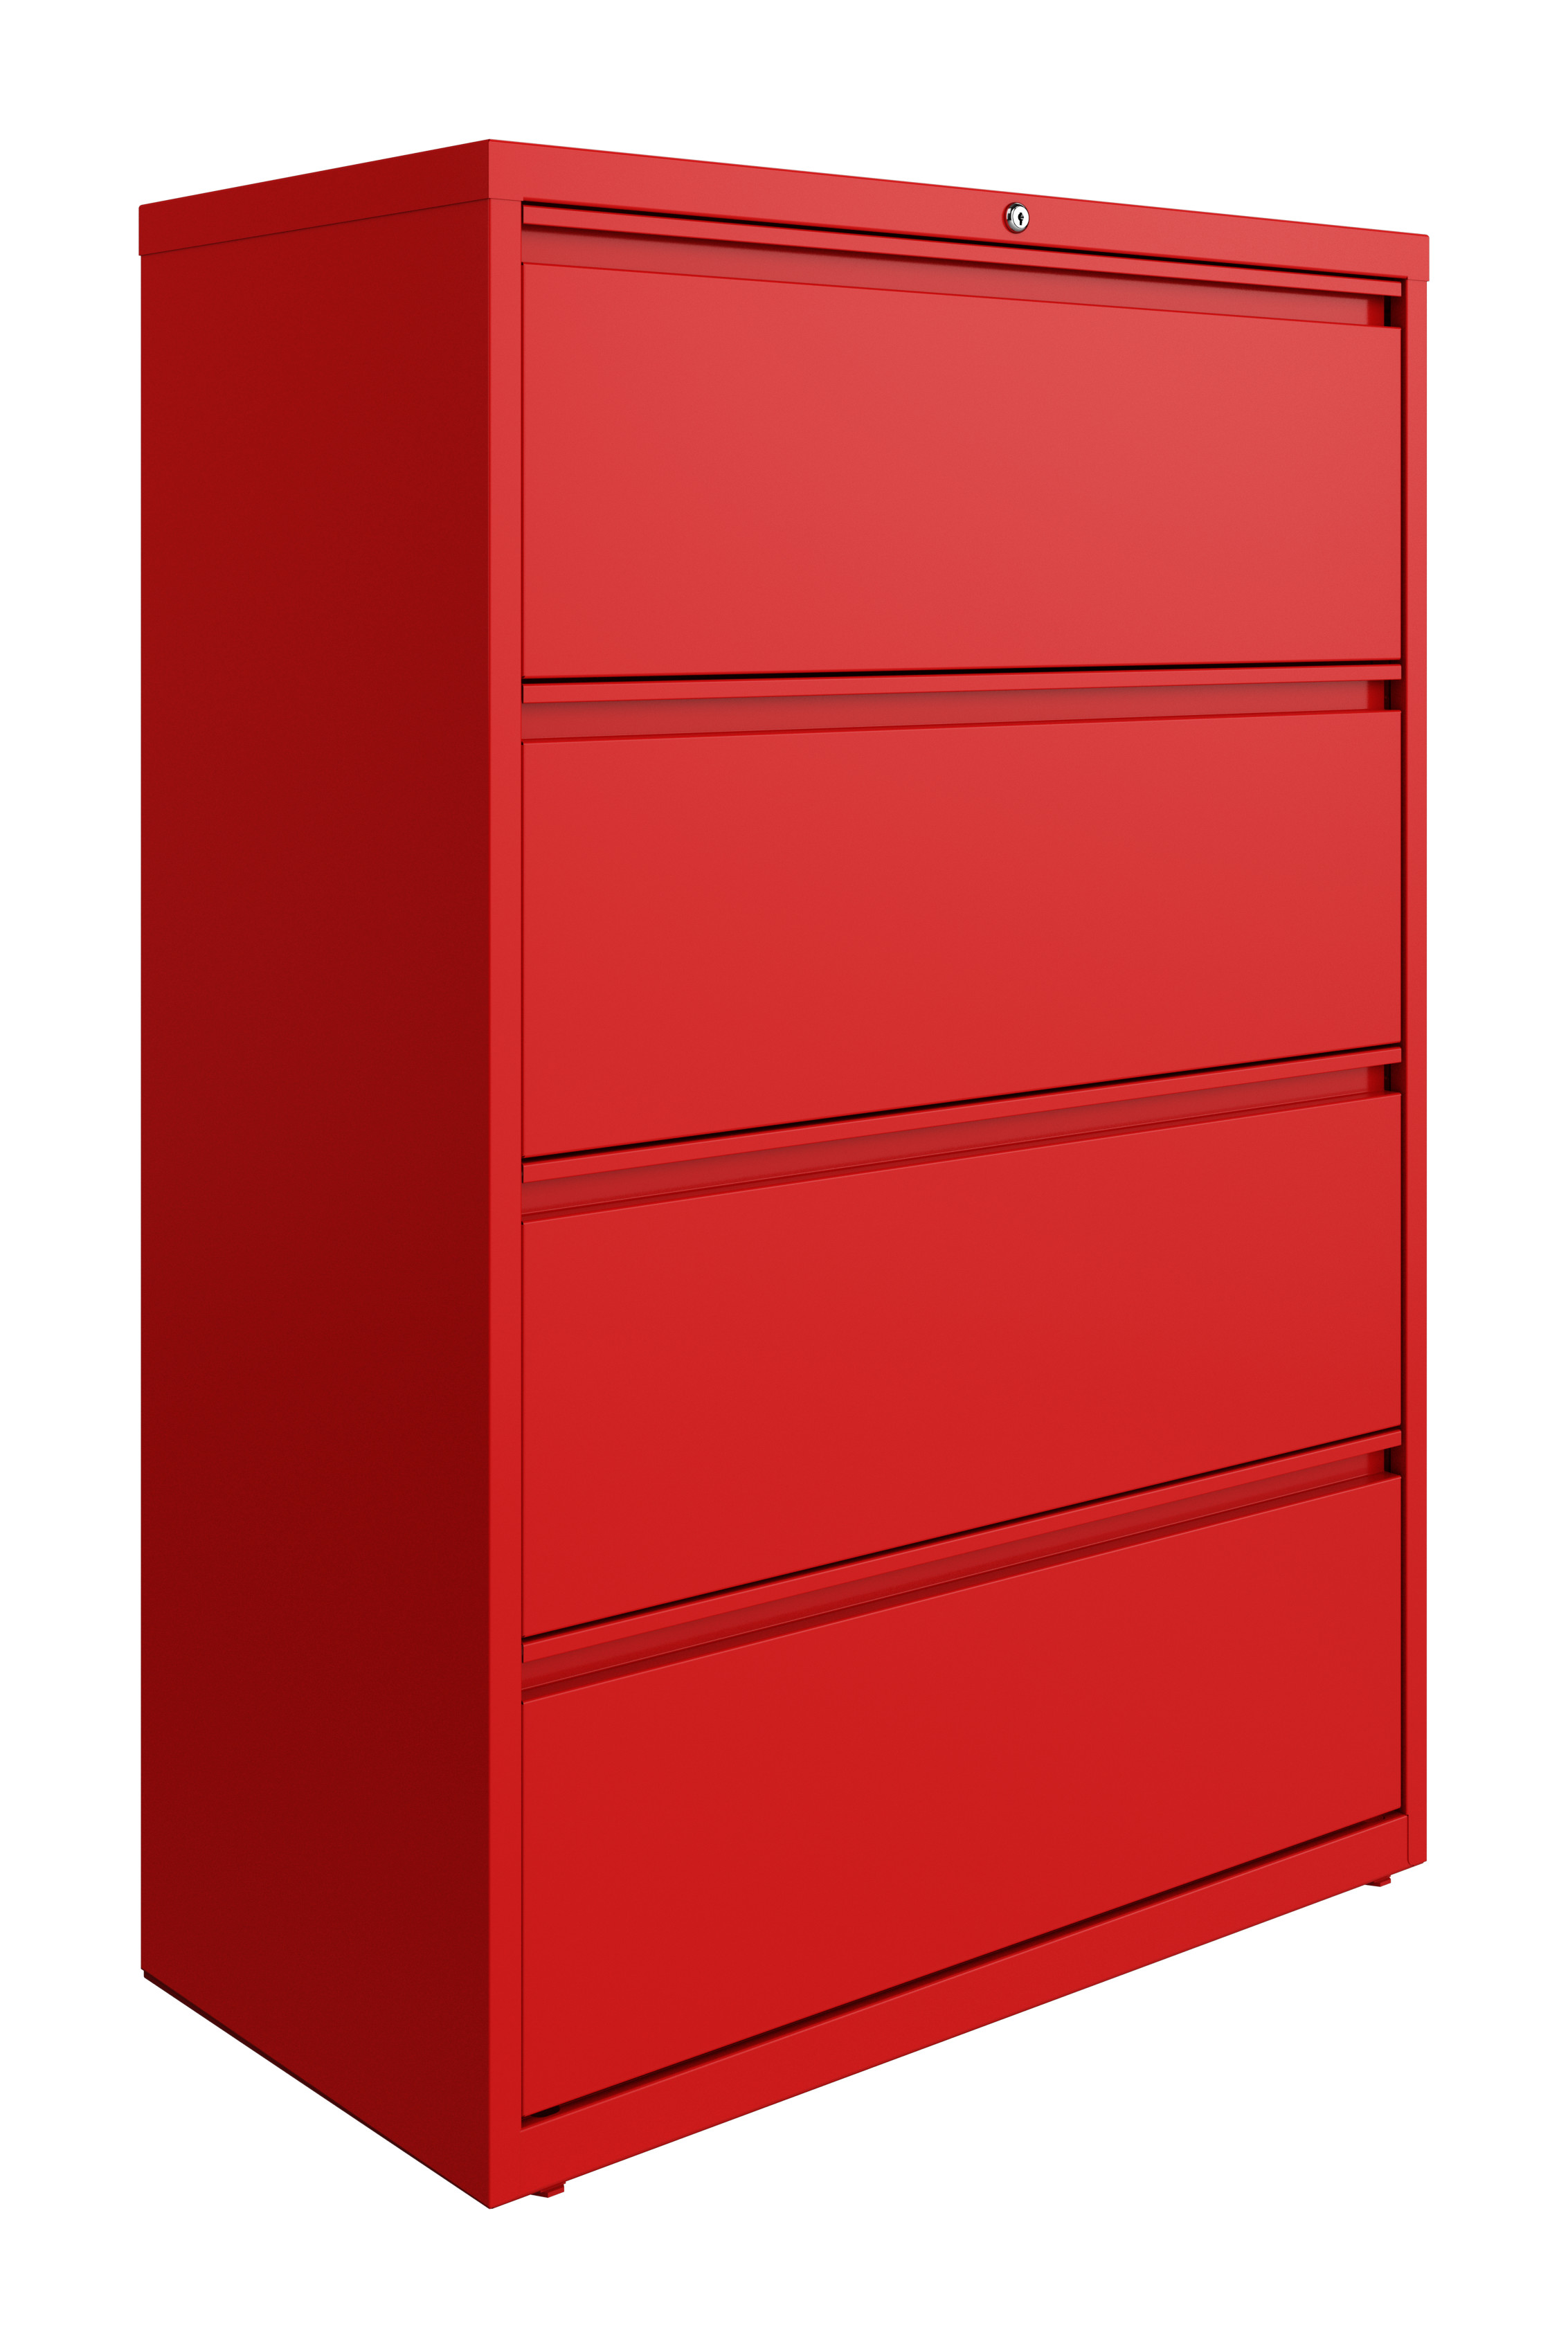 Hirsh 36 Inch Wide 4 Drawer Metal Lateral File Cabinet for Home and Office, Holds Letter, Legal and A4 Hanging Folders, Red - image 1 of 5